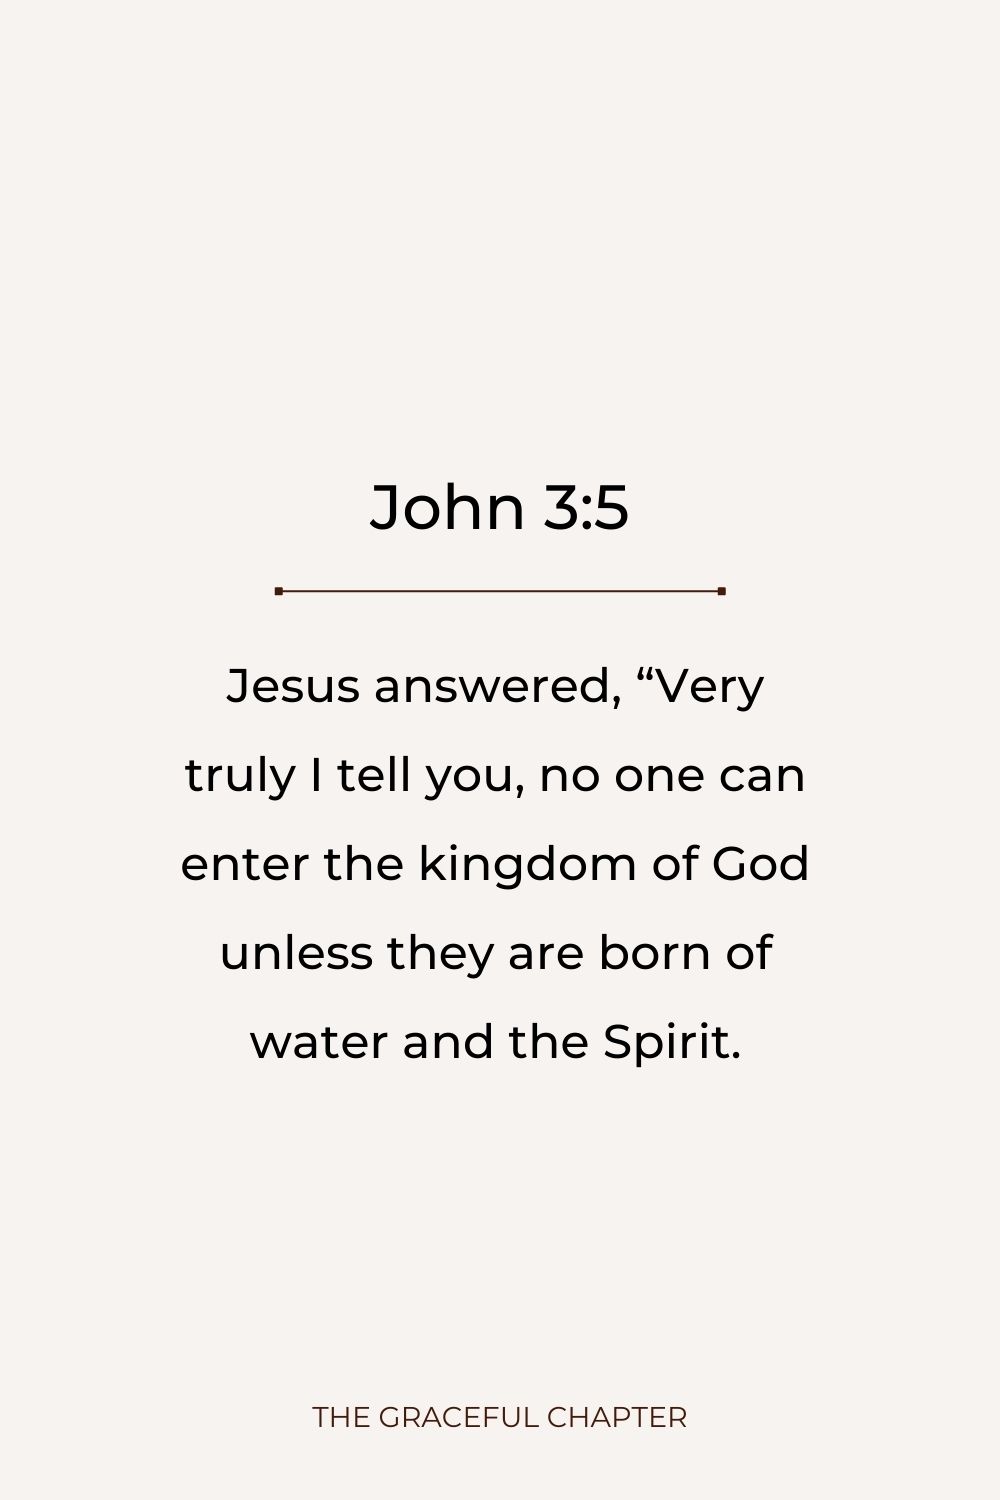 Jesus answered, “Very truly I tell you, no one can enter the kingdom of God unless they are born of water and the Spirit. John 3:5